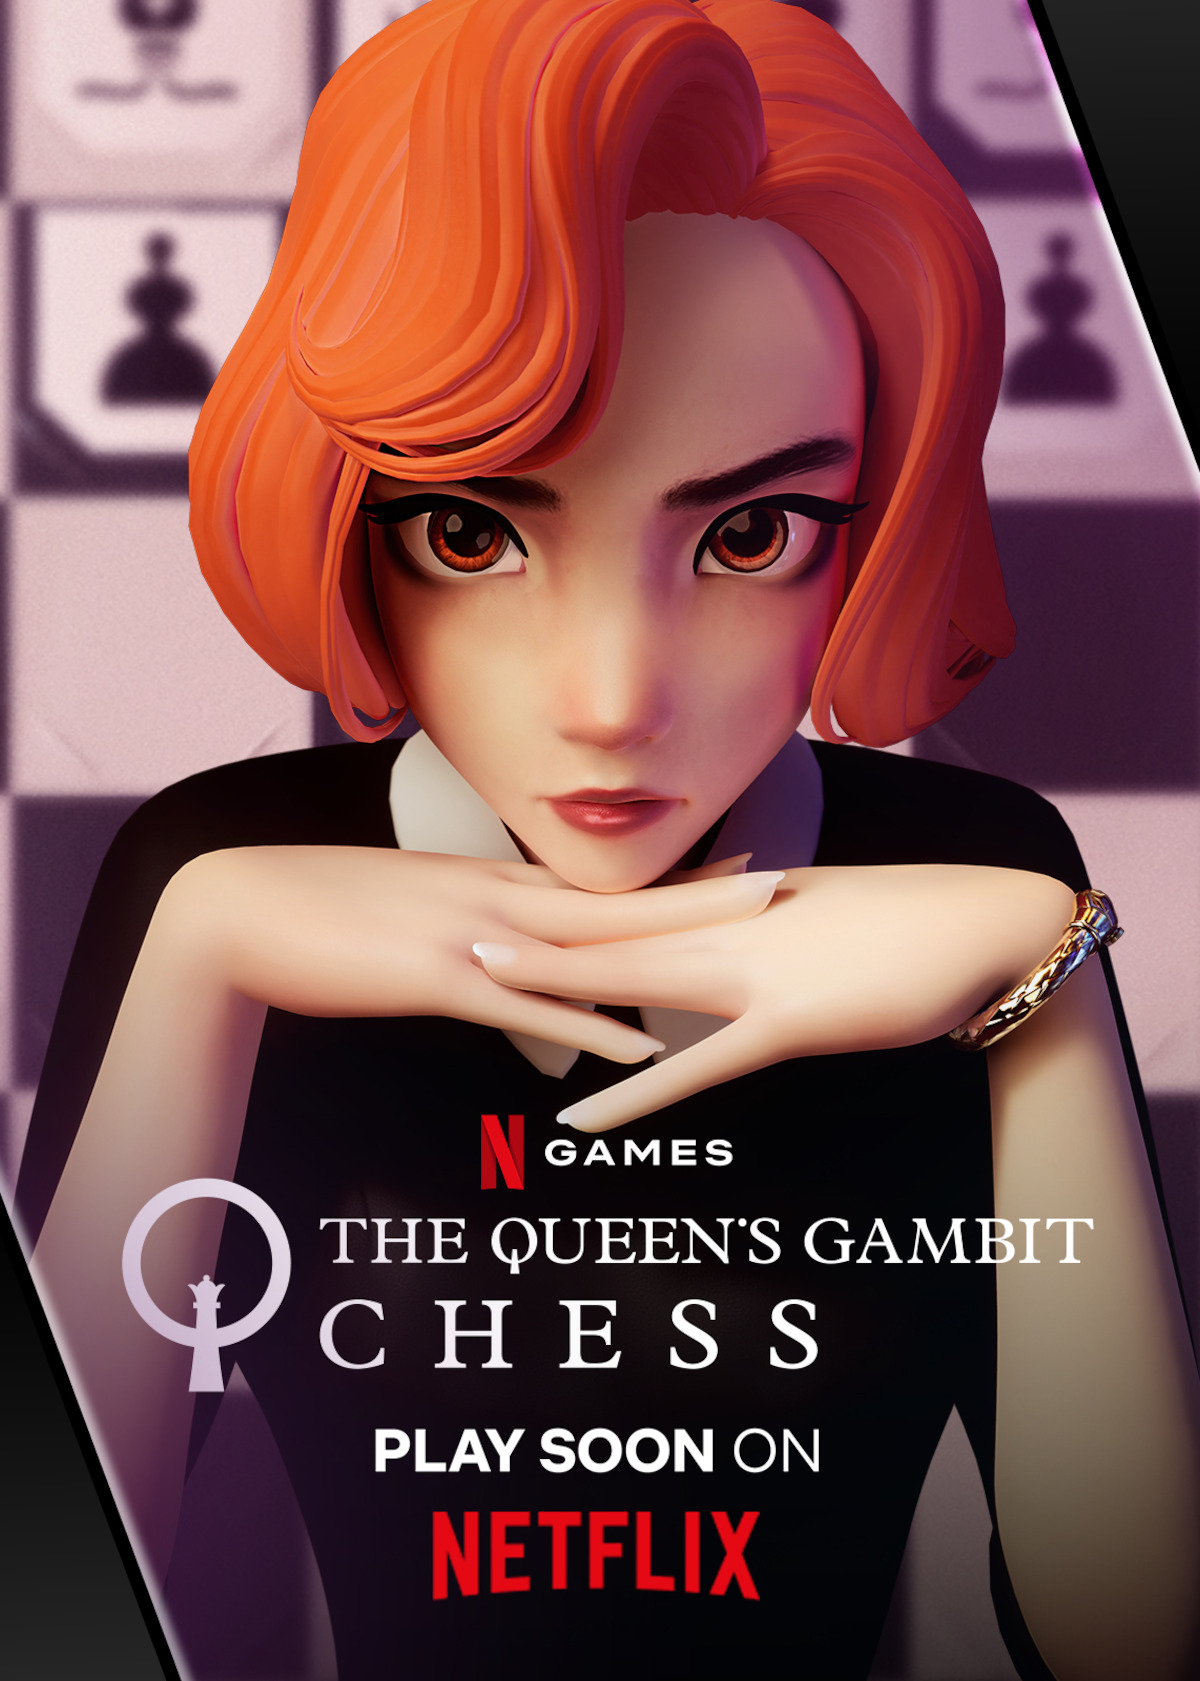 The Queen's Gambit Cast Guide: Where You Recognize The Actors From